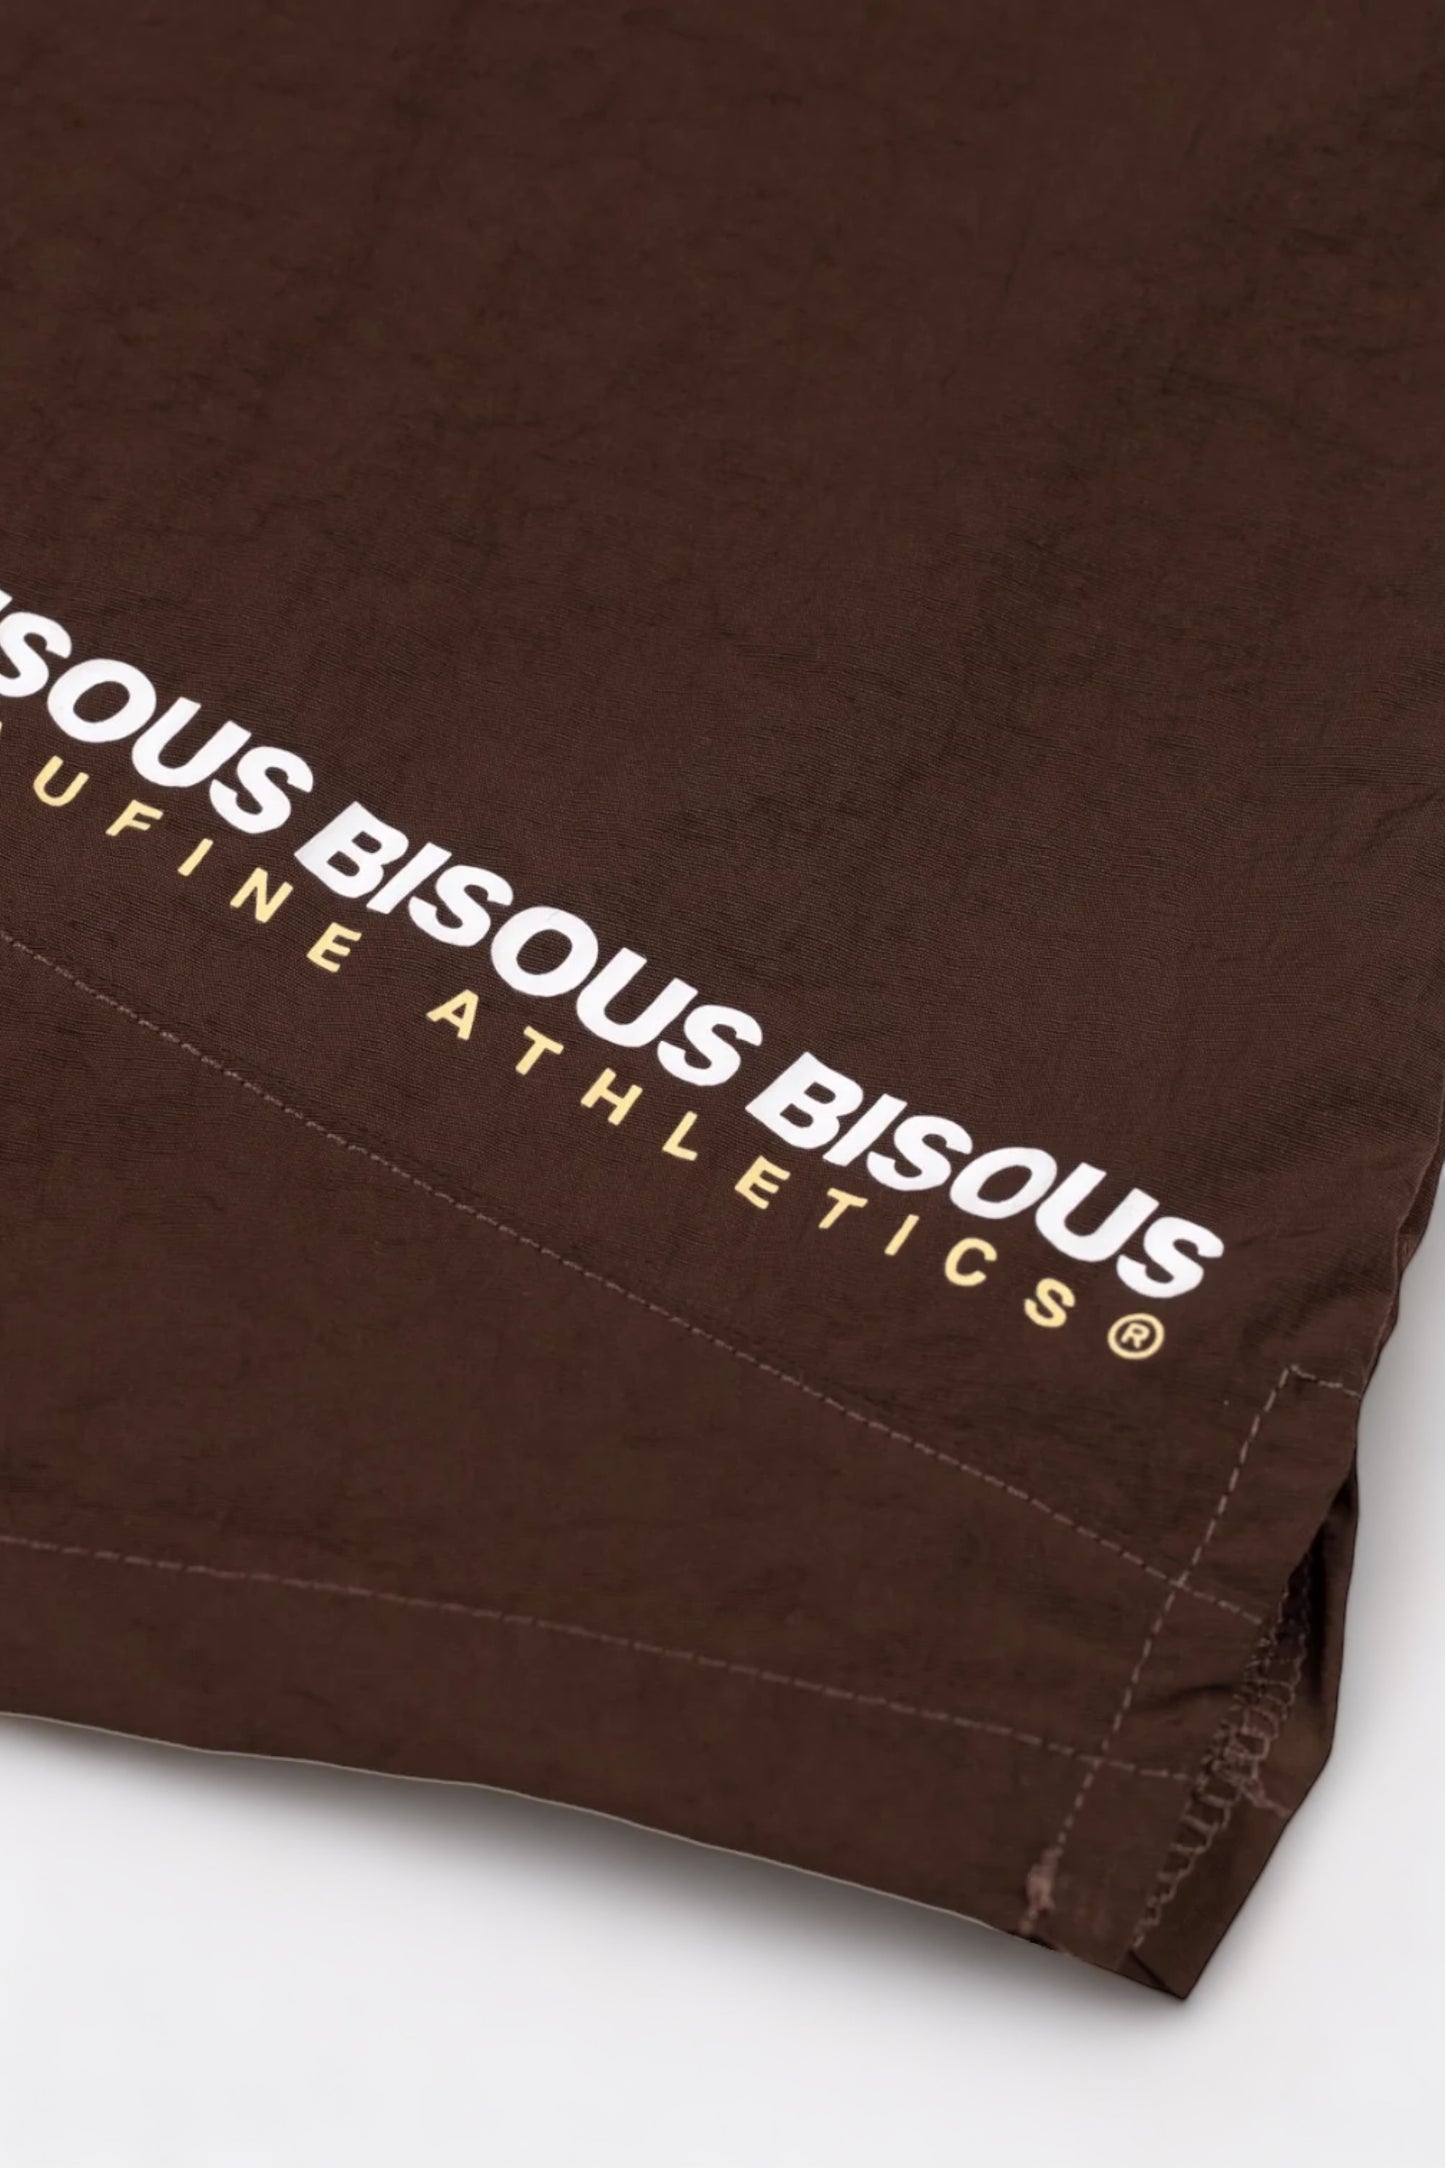 Peaufine x Bisous - Patchwork Training Short Run For Fun (Brown)